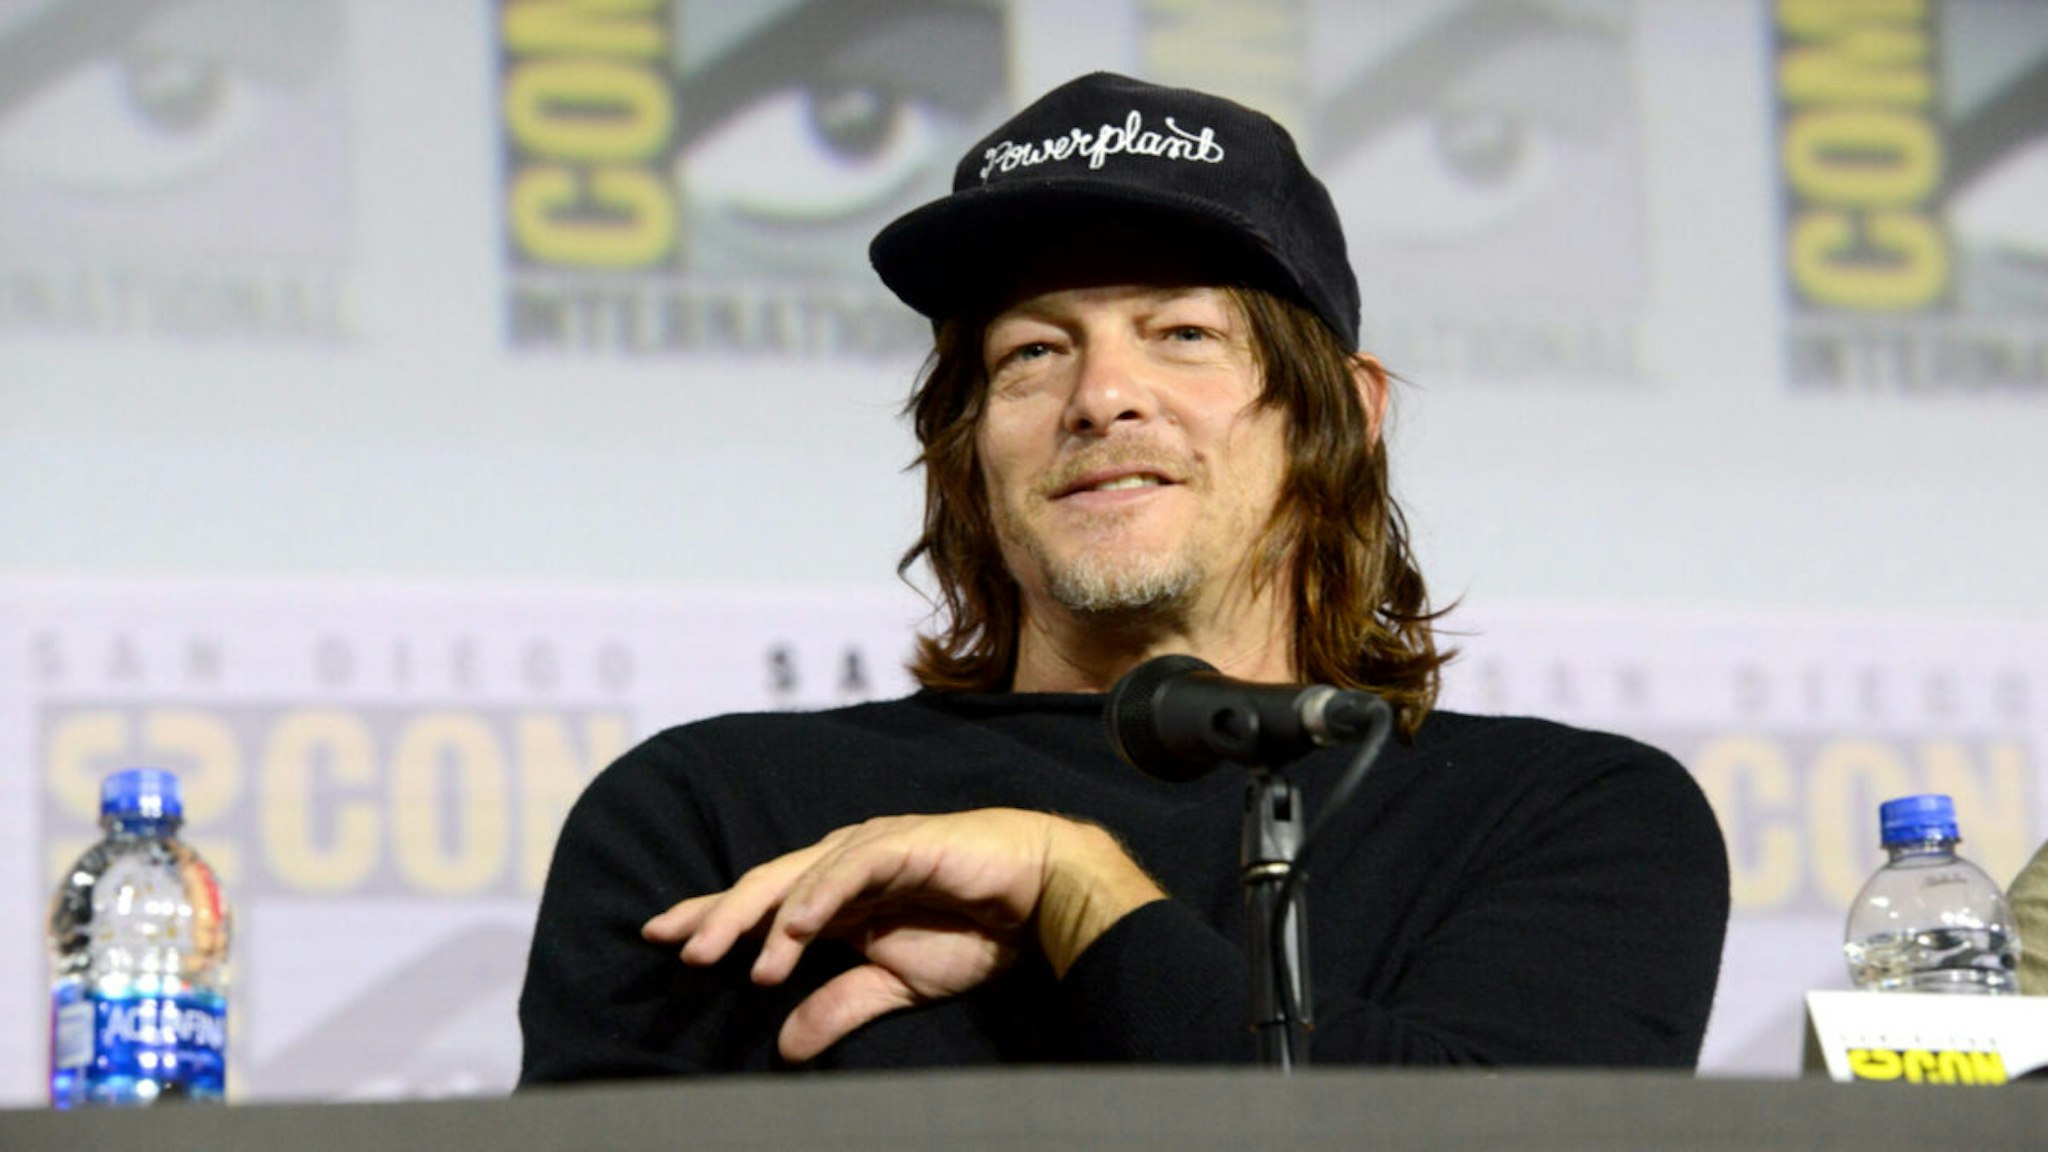 Norman Reedus speaks at "The Walking Dead" Panel during 2019 Comic-Con International at San Diego Convention Center on July 19, 2019 in San Diego, California.